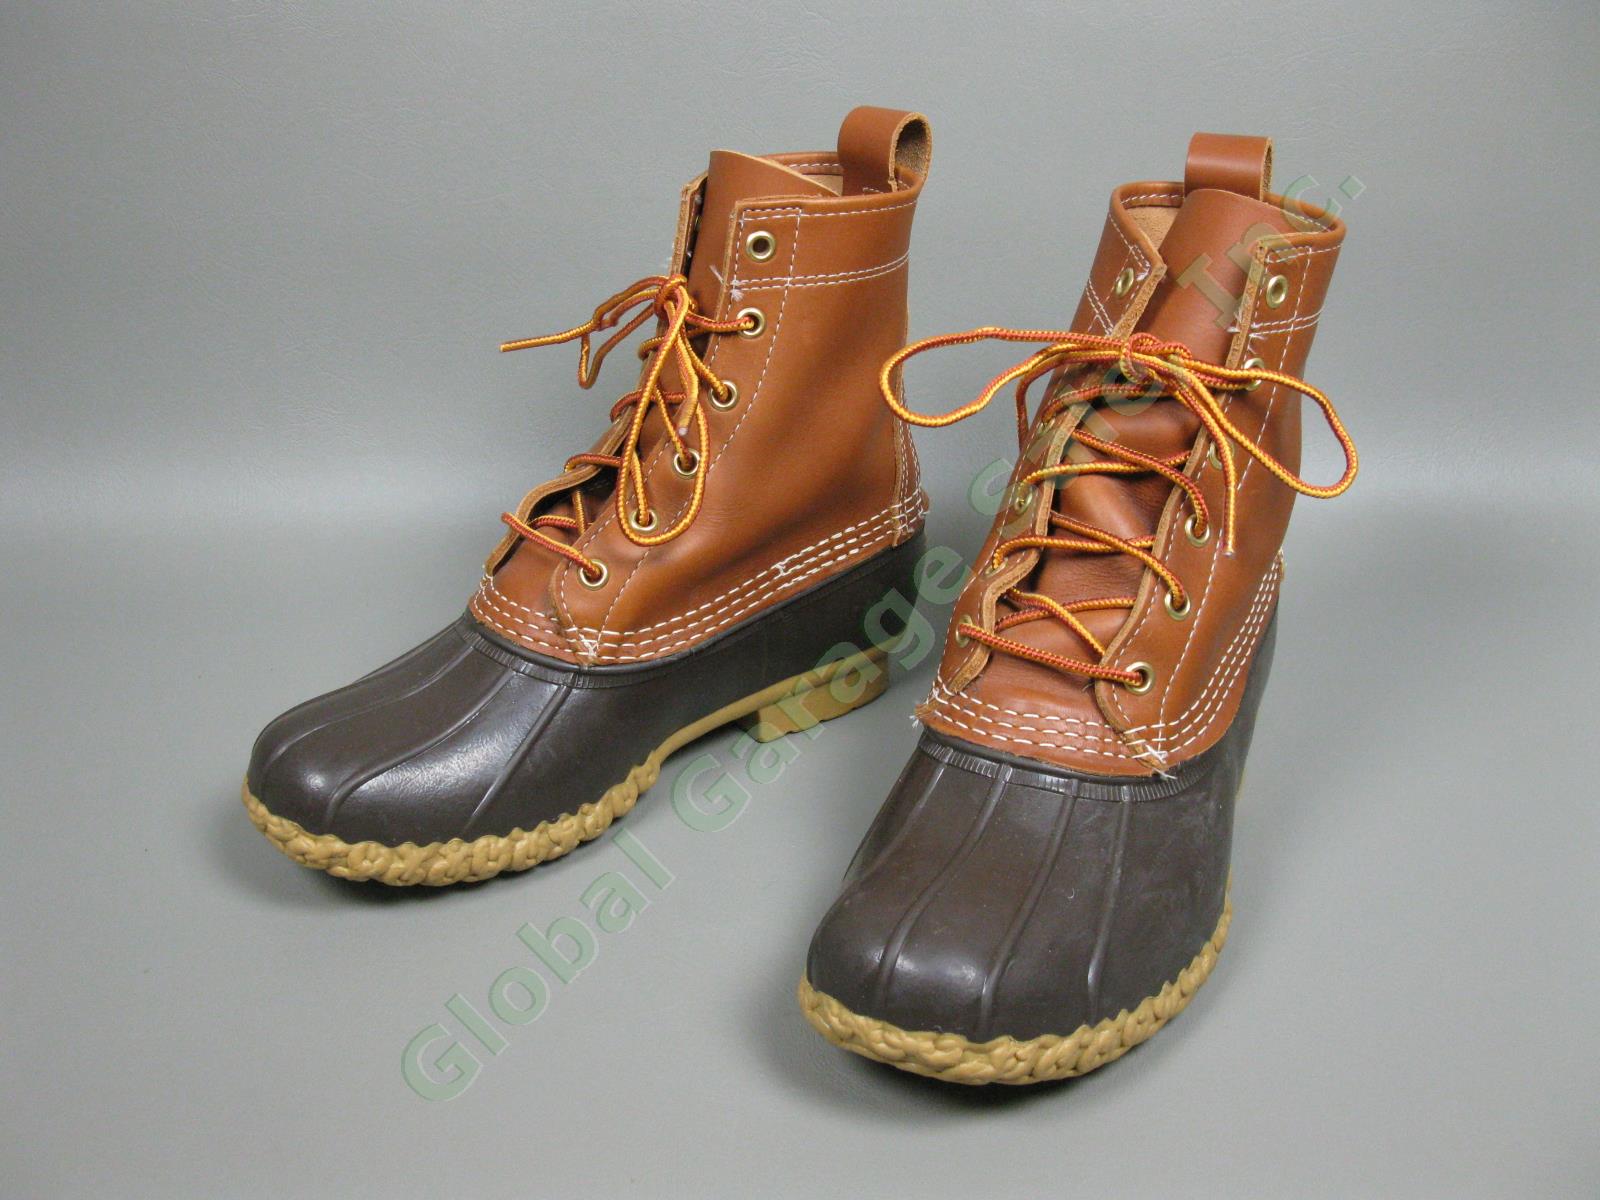 LL Bean Original Leather/Rubber 8" Duck Boots Womens Size 6 USA Made #06009 NR